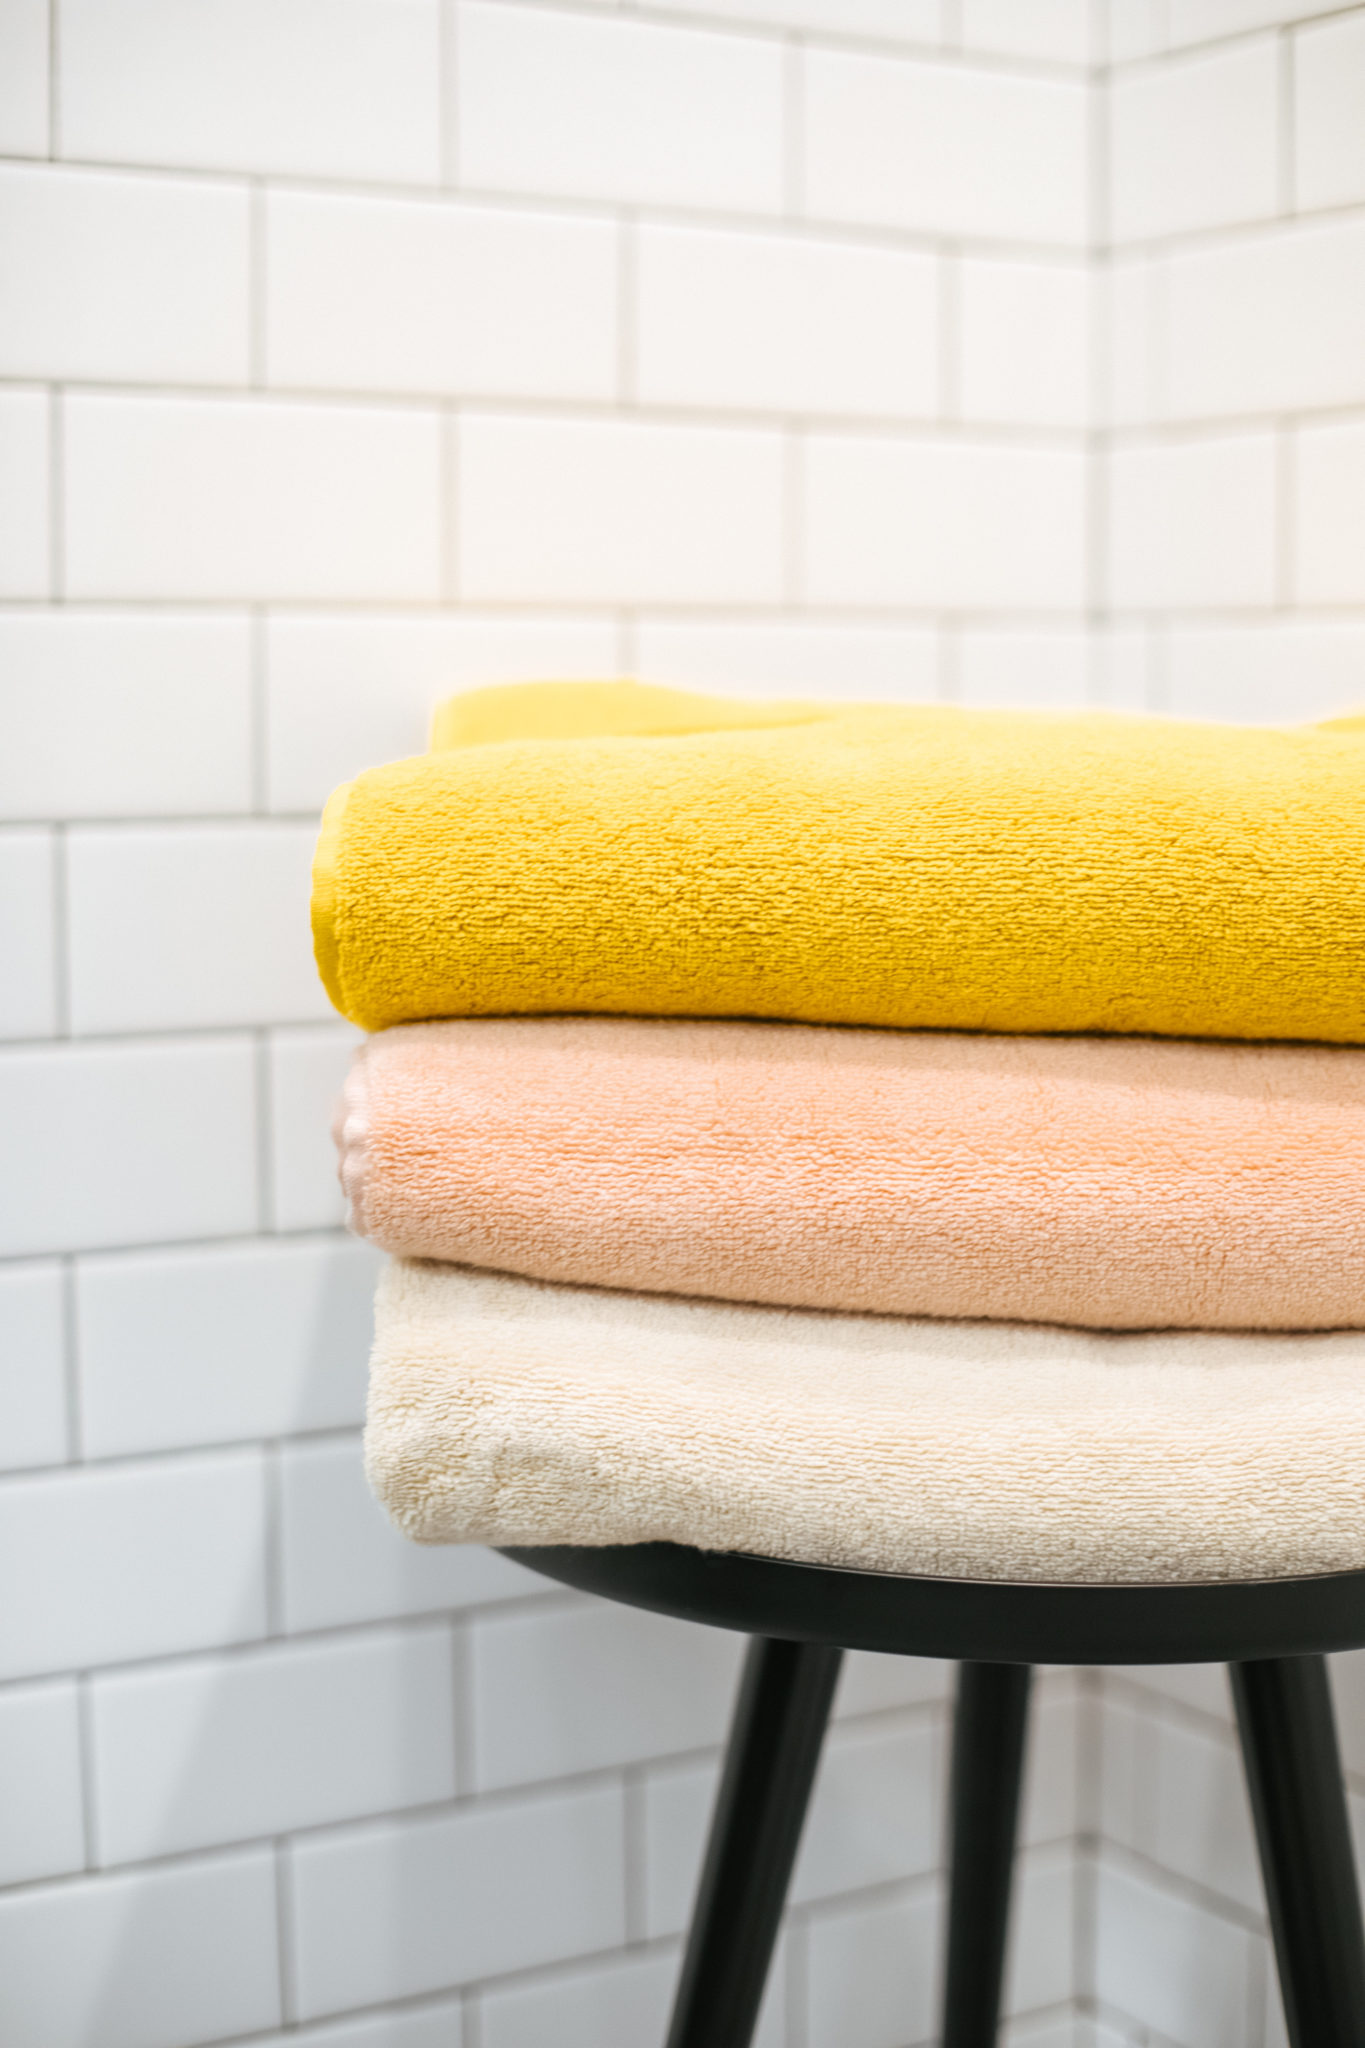 LIY Tested + Approved: Bath Towel Edition